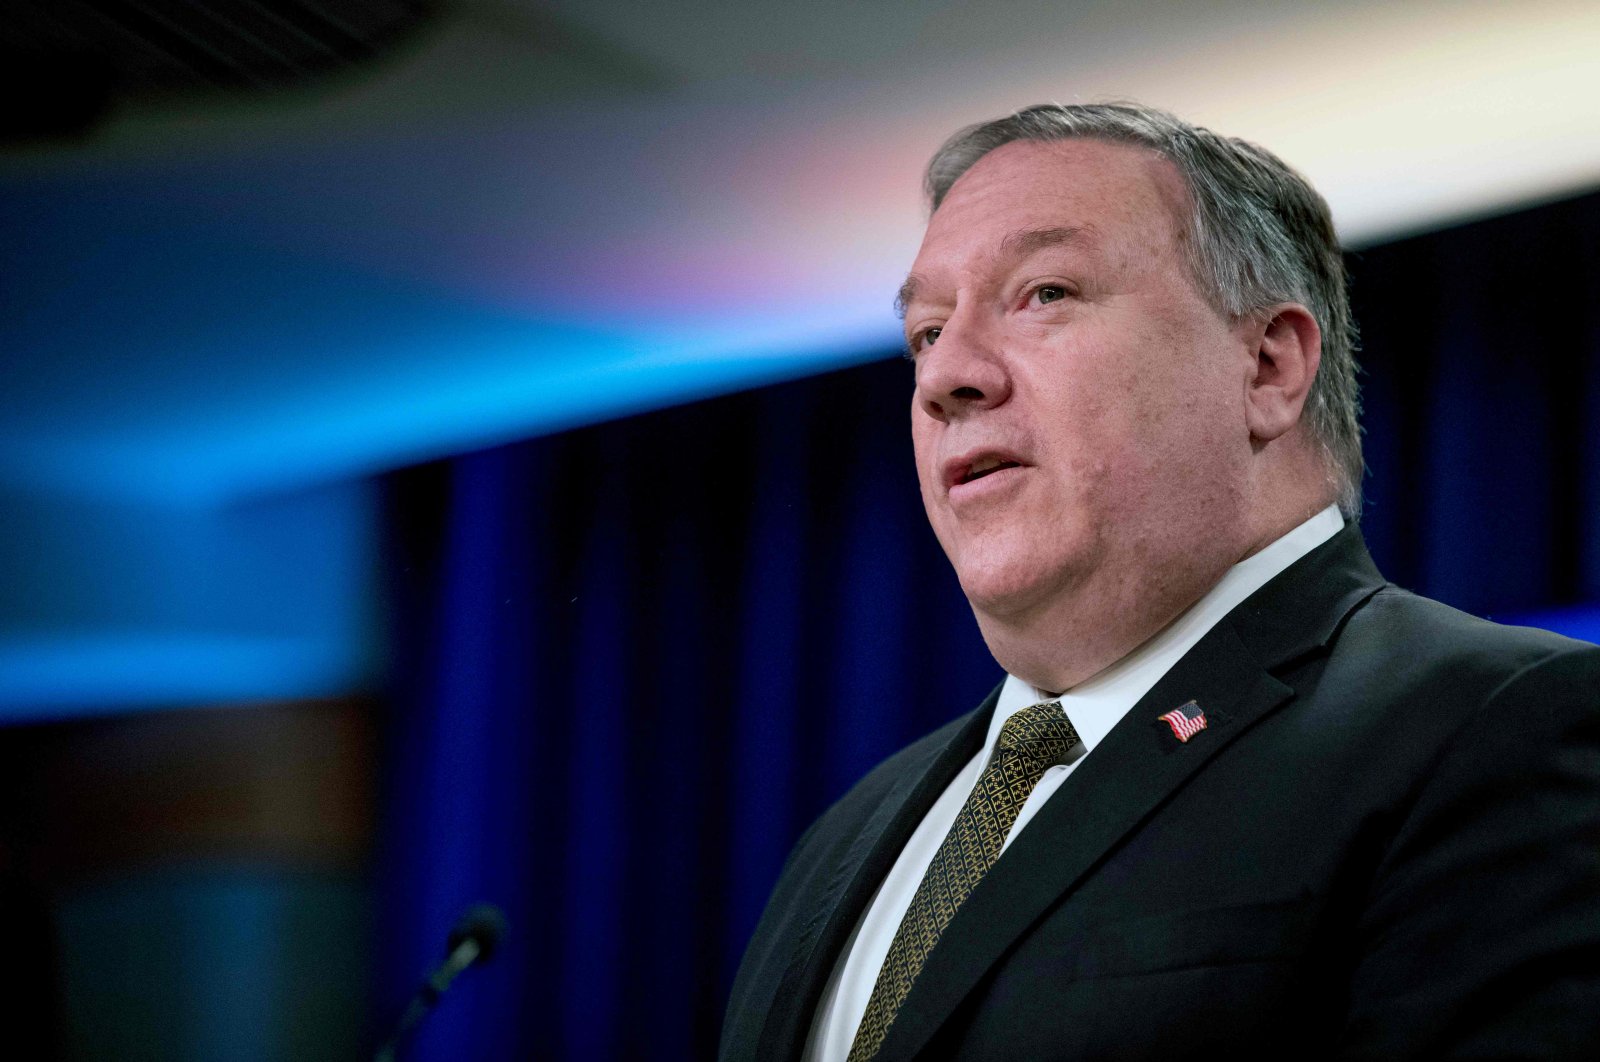 Secretary of State Mike Pompeo speaks during a news conference at the State Department in Washington, D.C., on June 10, 2020. (AFP Photo)